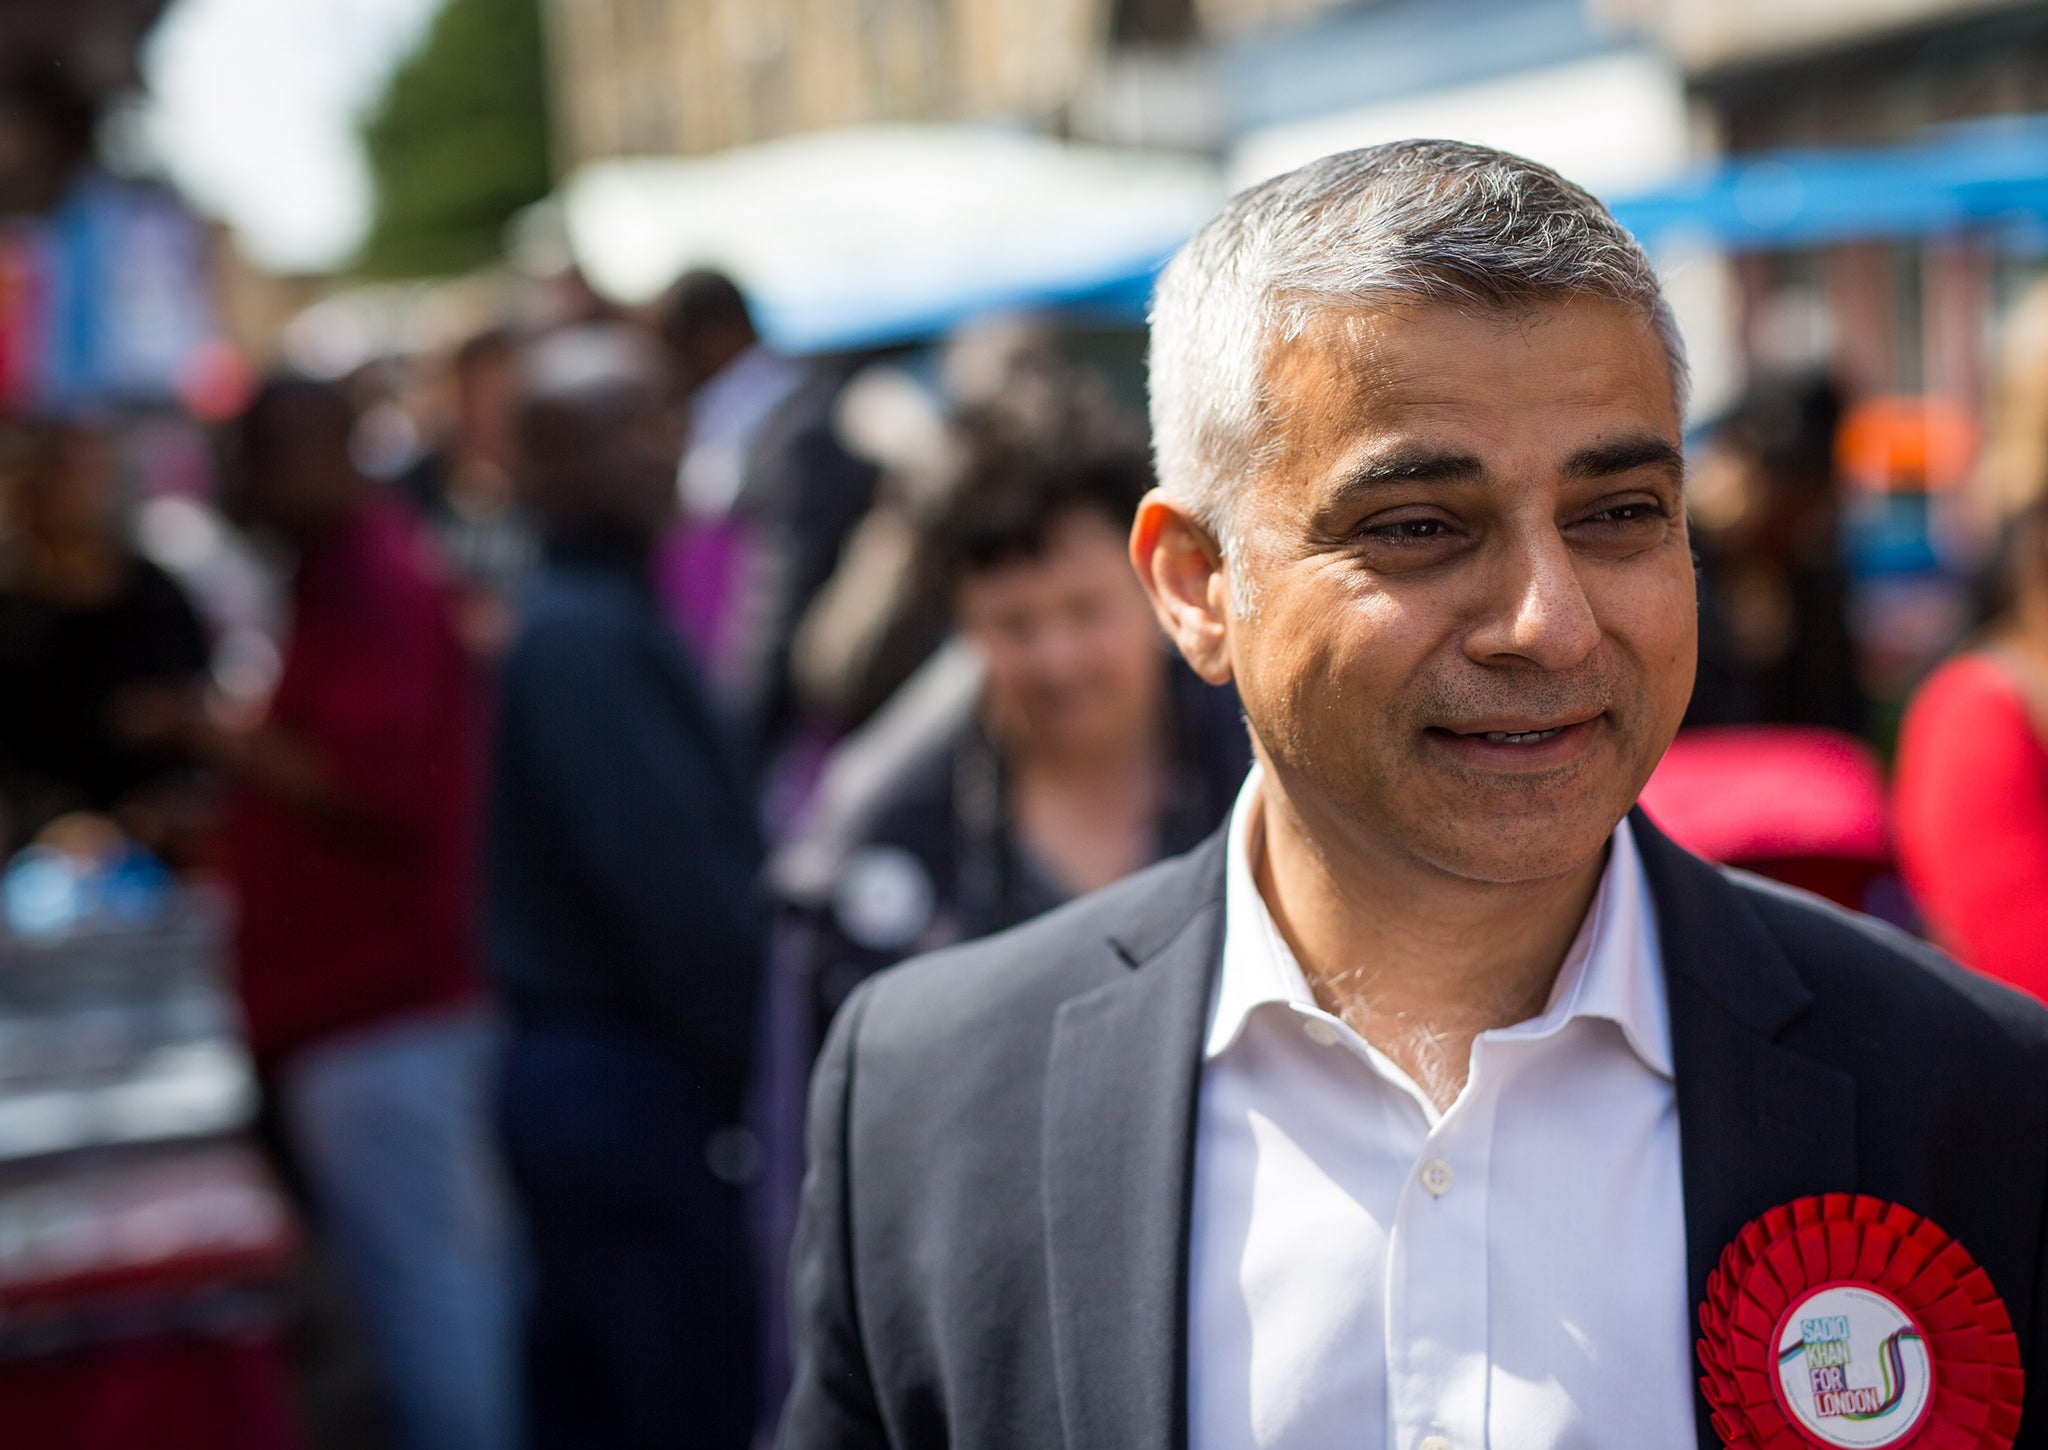 Sadiq Khan is so much under the control of Jihadists, that he received death threats from them when he supported gay marriage